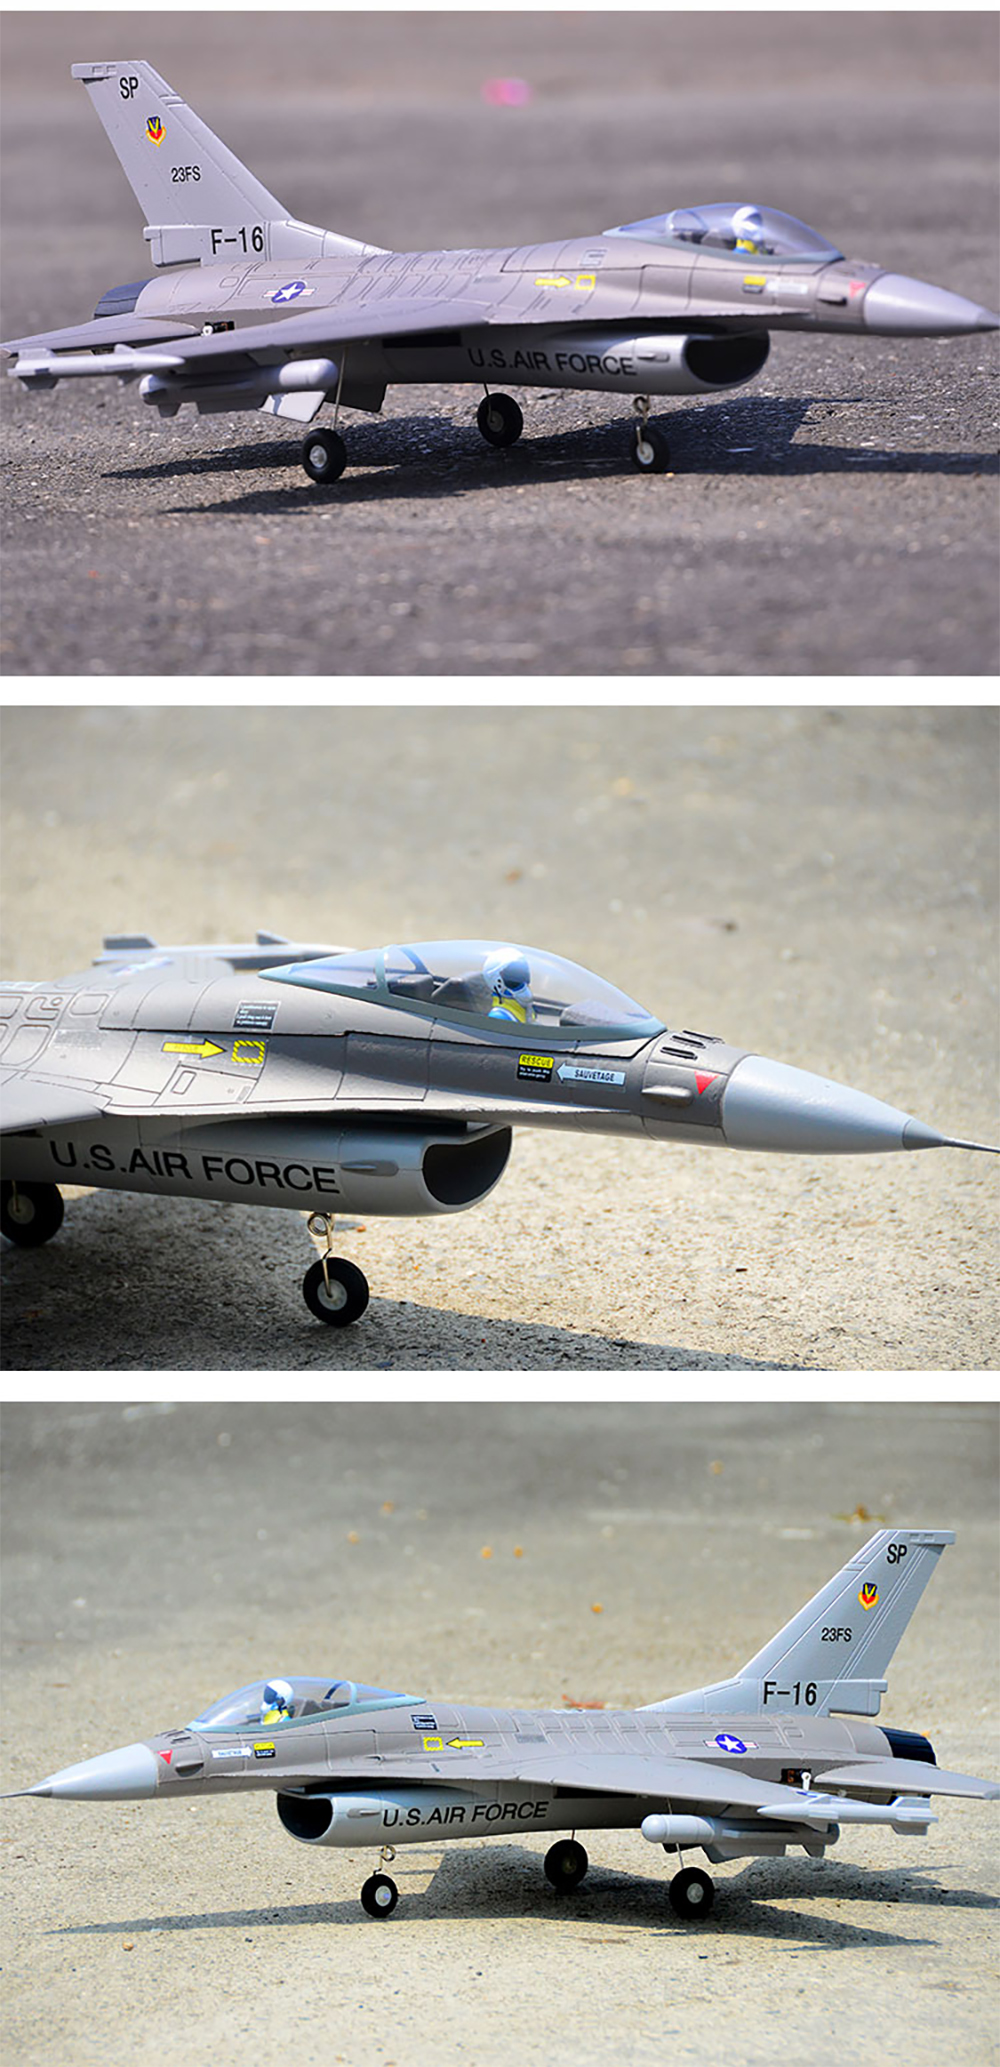 FMS-F-16-Fighting-Falcon-V2-760mm-Wingspan-64mm-11-Blade-Ducted-Fan-Aircrafts-EPO-RC-Airplane-PNP-1773419-10